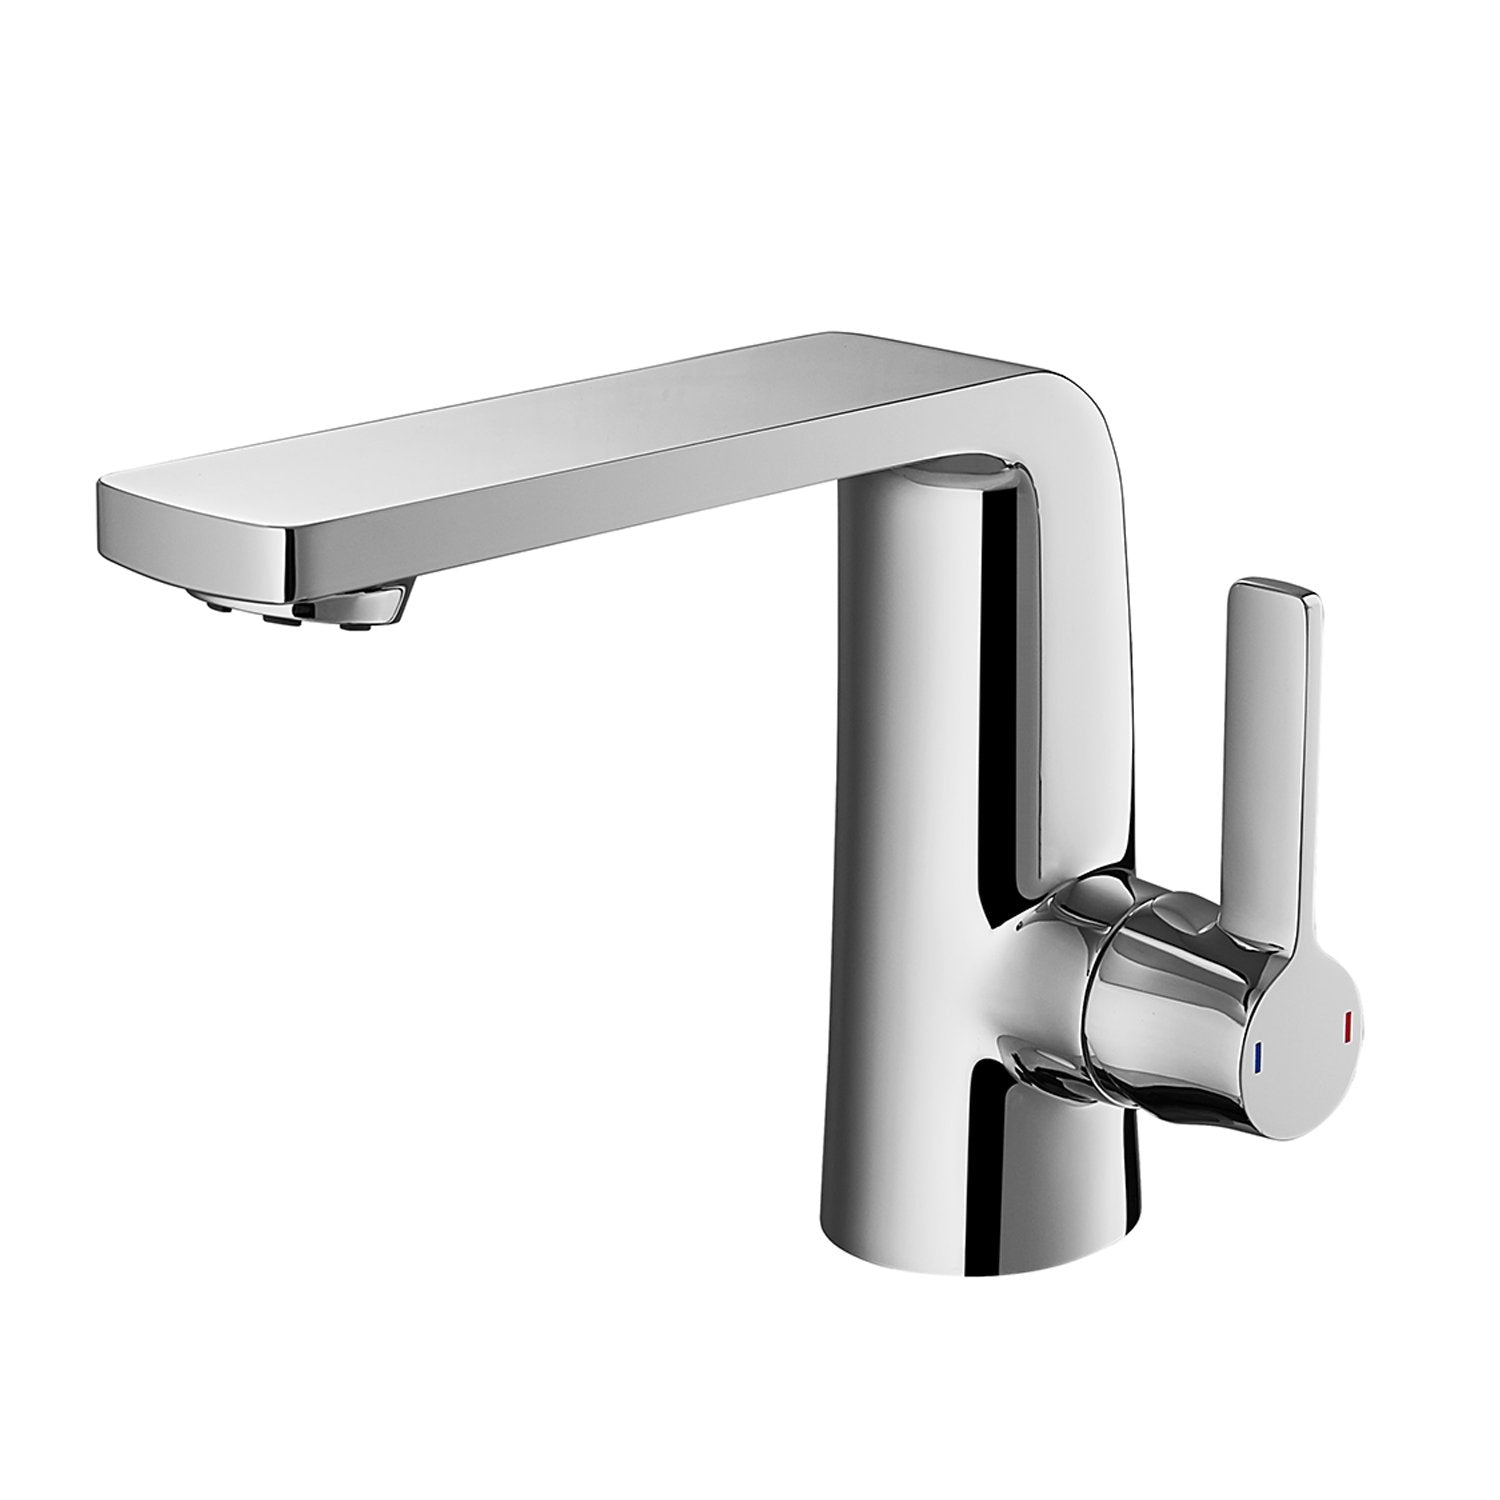 DAX Single Handle Bathroom Faucet, Brass Body, Brushed Nickel Finish, Spout Height 4-15/16 Inches (DAX-8226-BN)